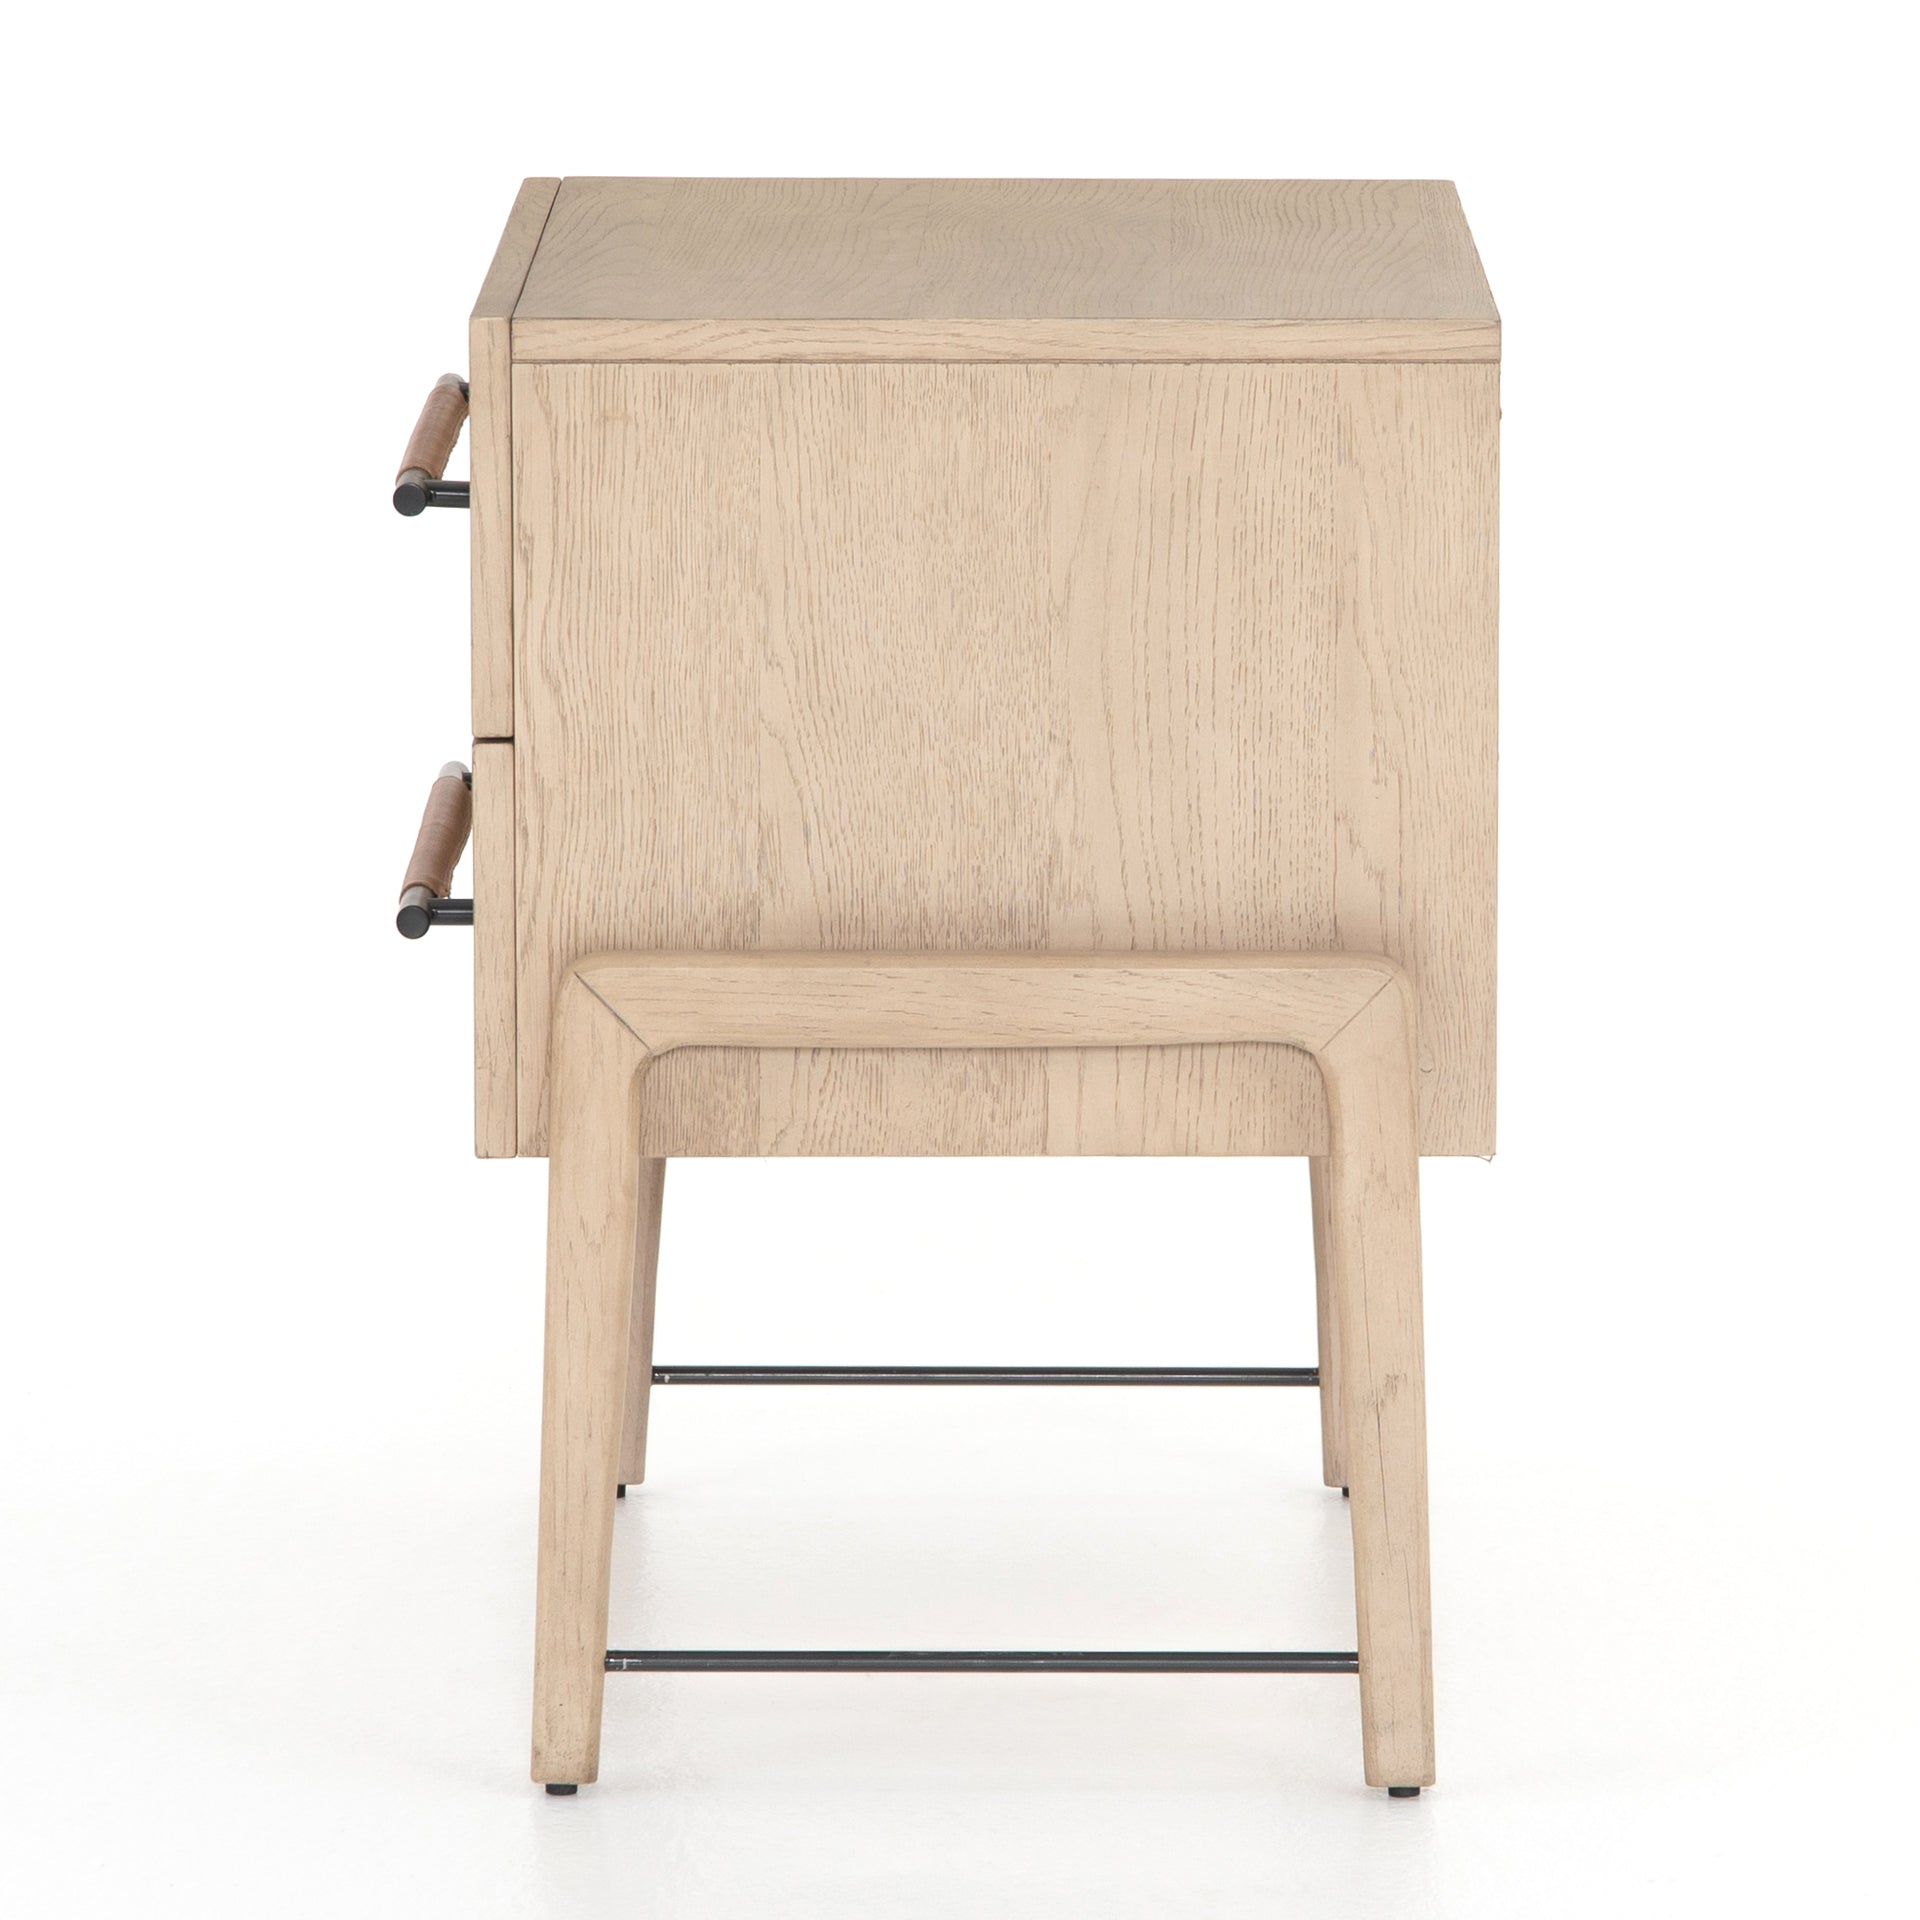 The light-finished oak of this Rosedale Nightstand brings a clean, brightness to any room. We love how the two spacious drawers have iron hardware wrapped in a gorgeous, tan leather. The dimension legs with iron connecting them bring a unique look to your bedroom or other area! Overall Dimensions: 27.25"w x 19.50"d x 26.00"h Materials: Oak Veneer, Top Grain Leather, Iron, Solid Oak